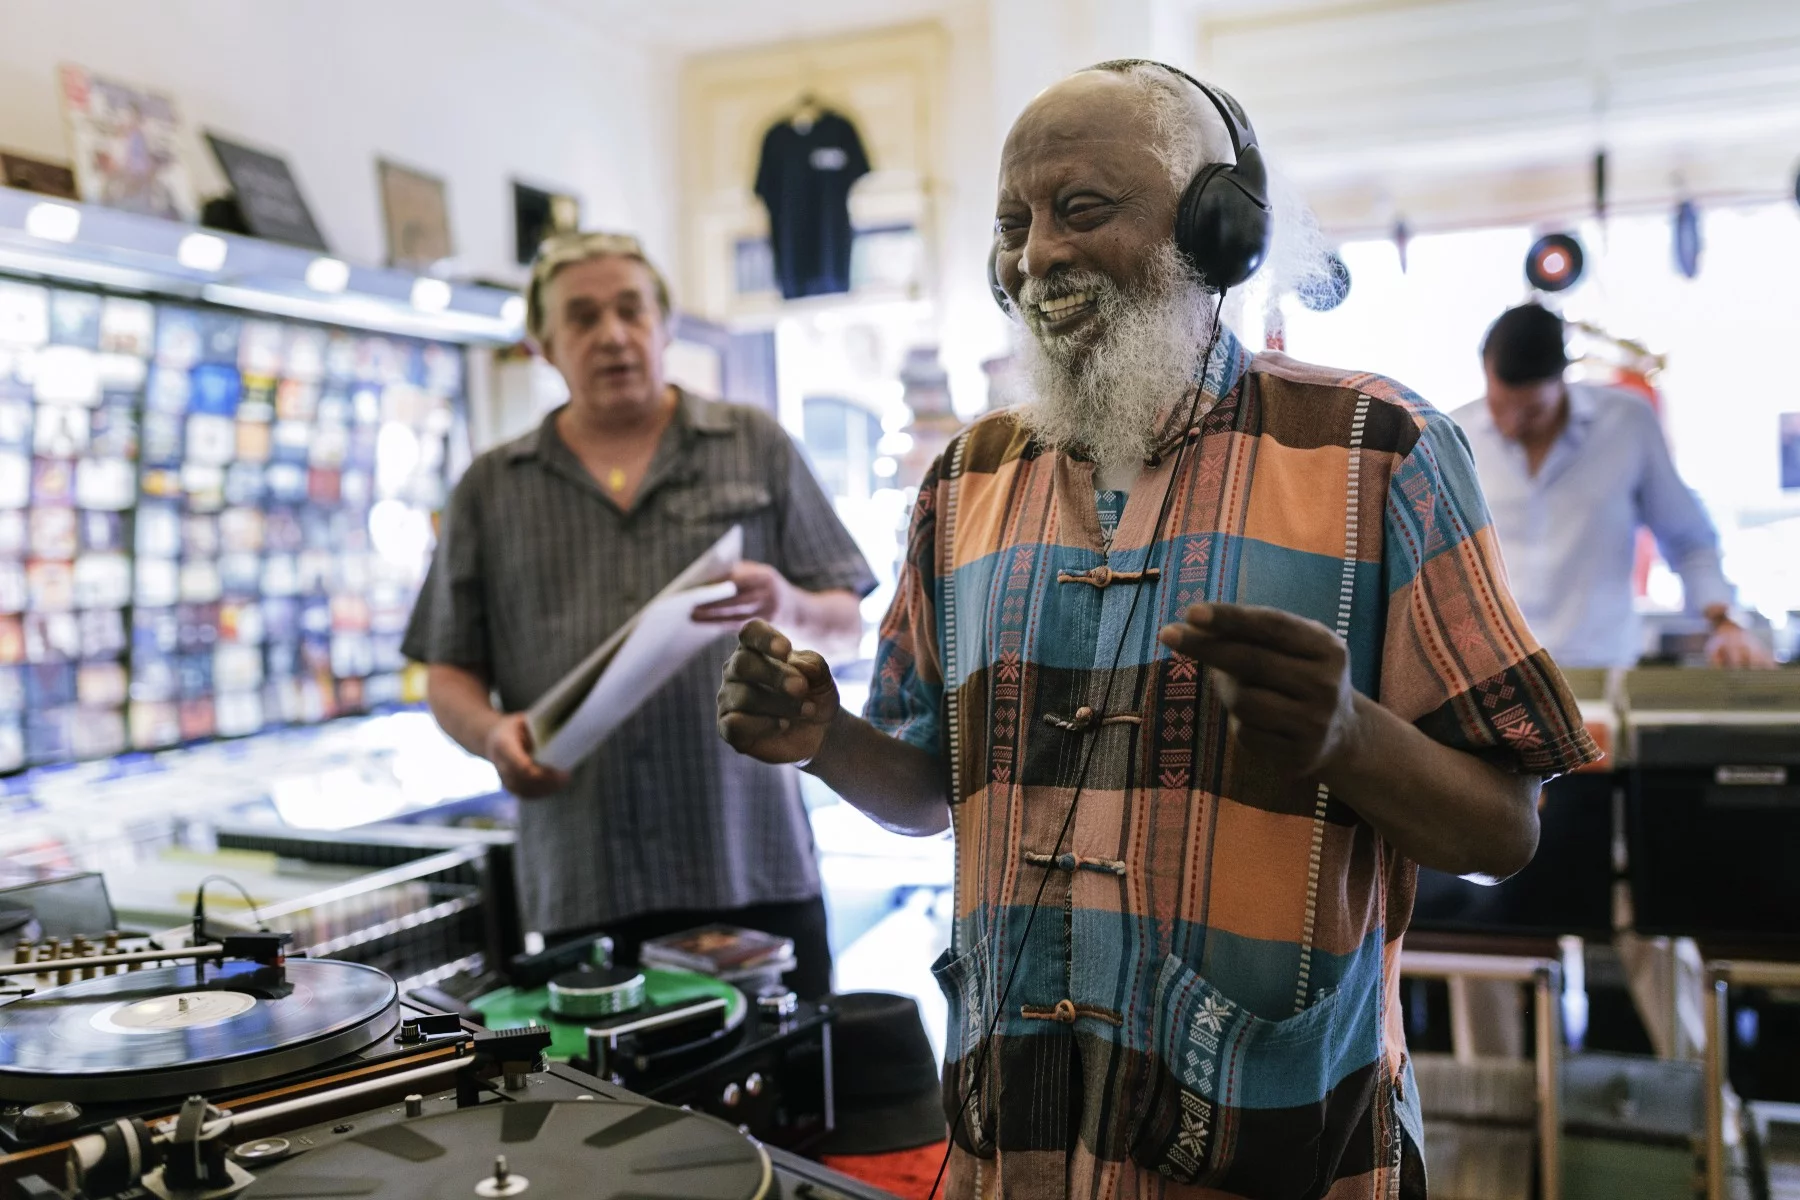 Elderly man laughing while listening to music in a record store. He is wearing headphones and snapping his fingers.